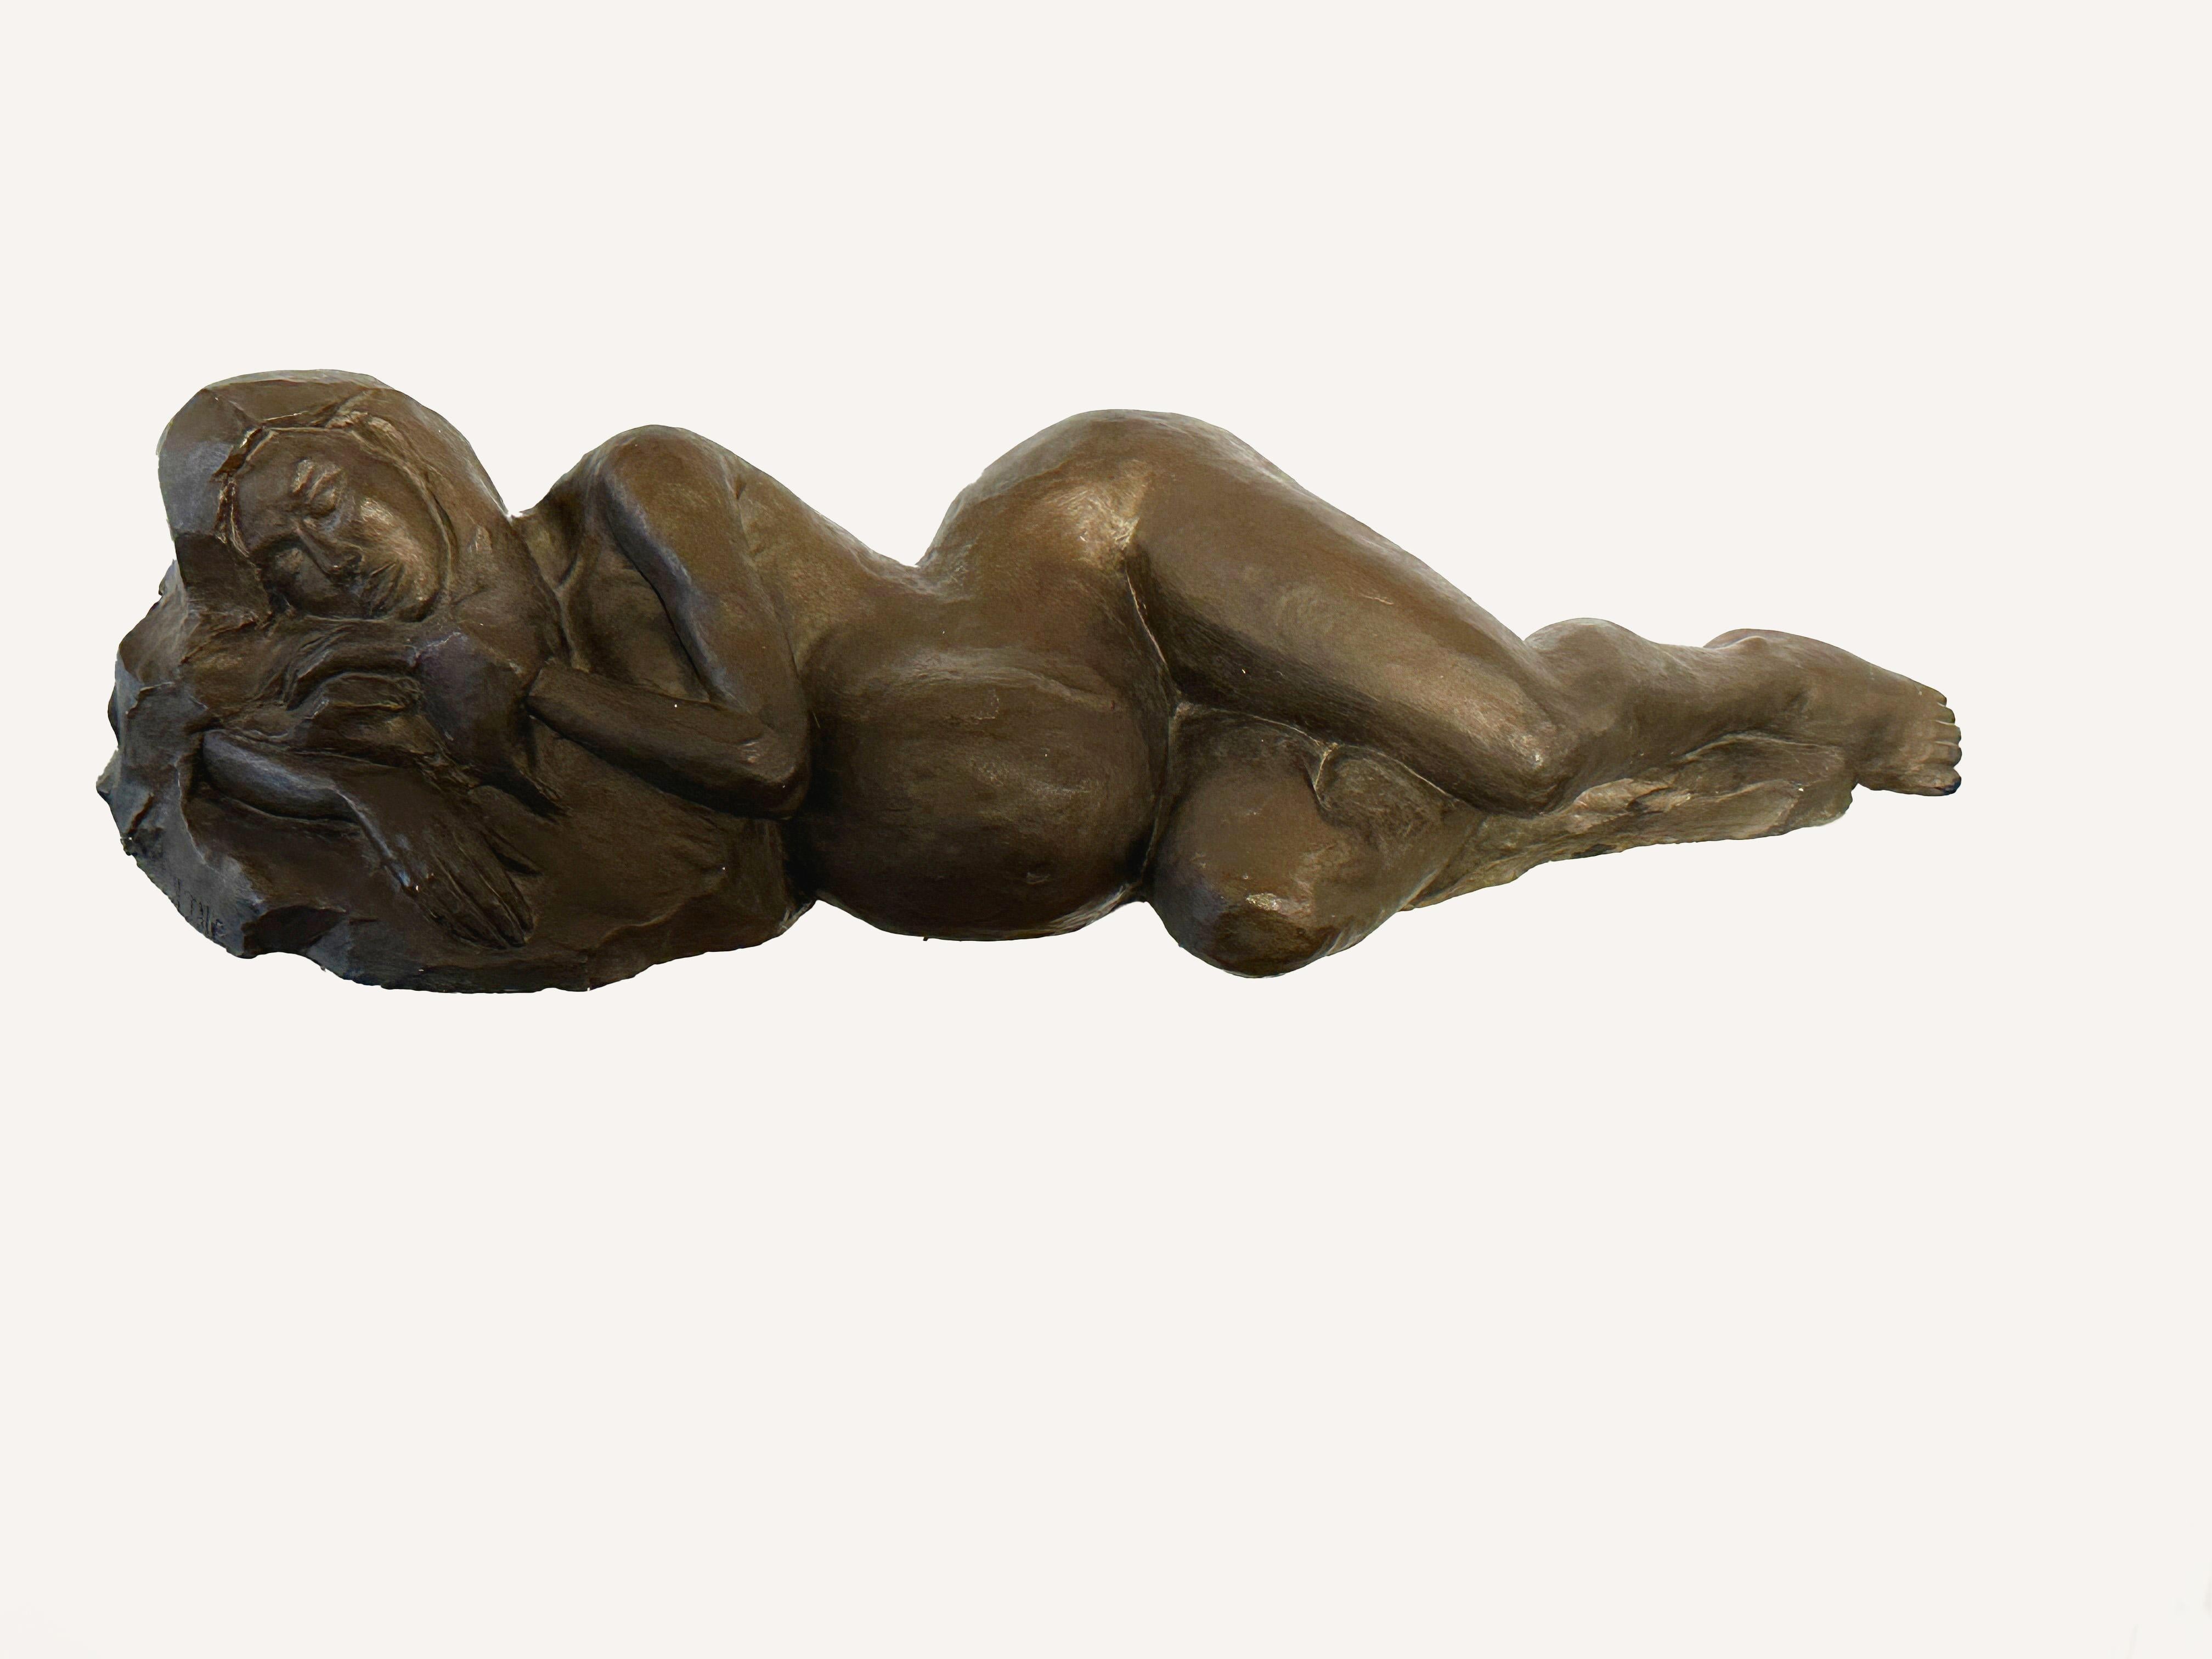 This sculpture by Natalie Krol is made of plaster with a beautiful bronze color finish. It is the cast for the bronze.
It shows a nude, pregnant woman resting. The expression on her face could almost suggest that the artist had surprised her model